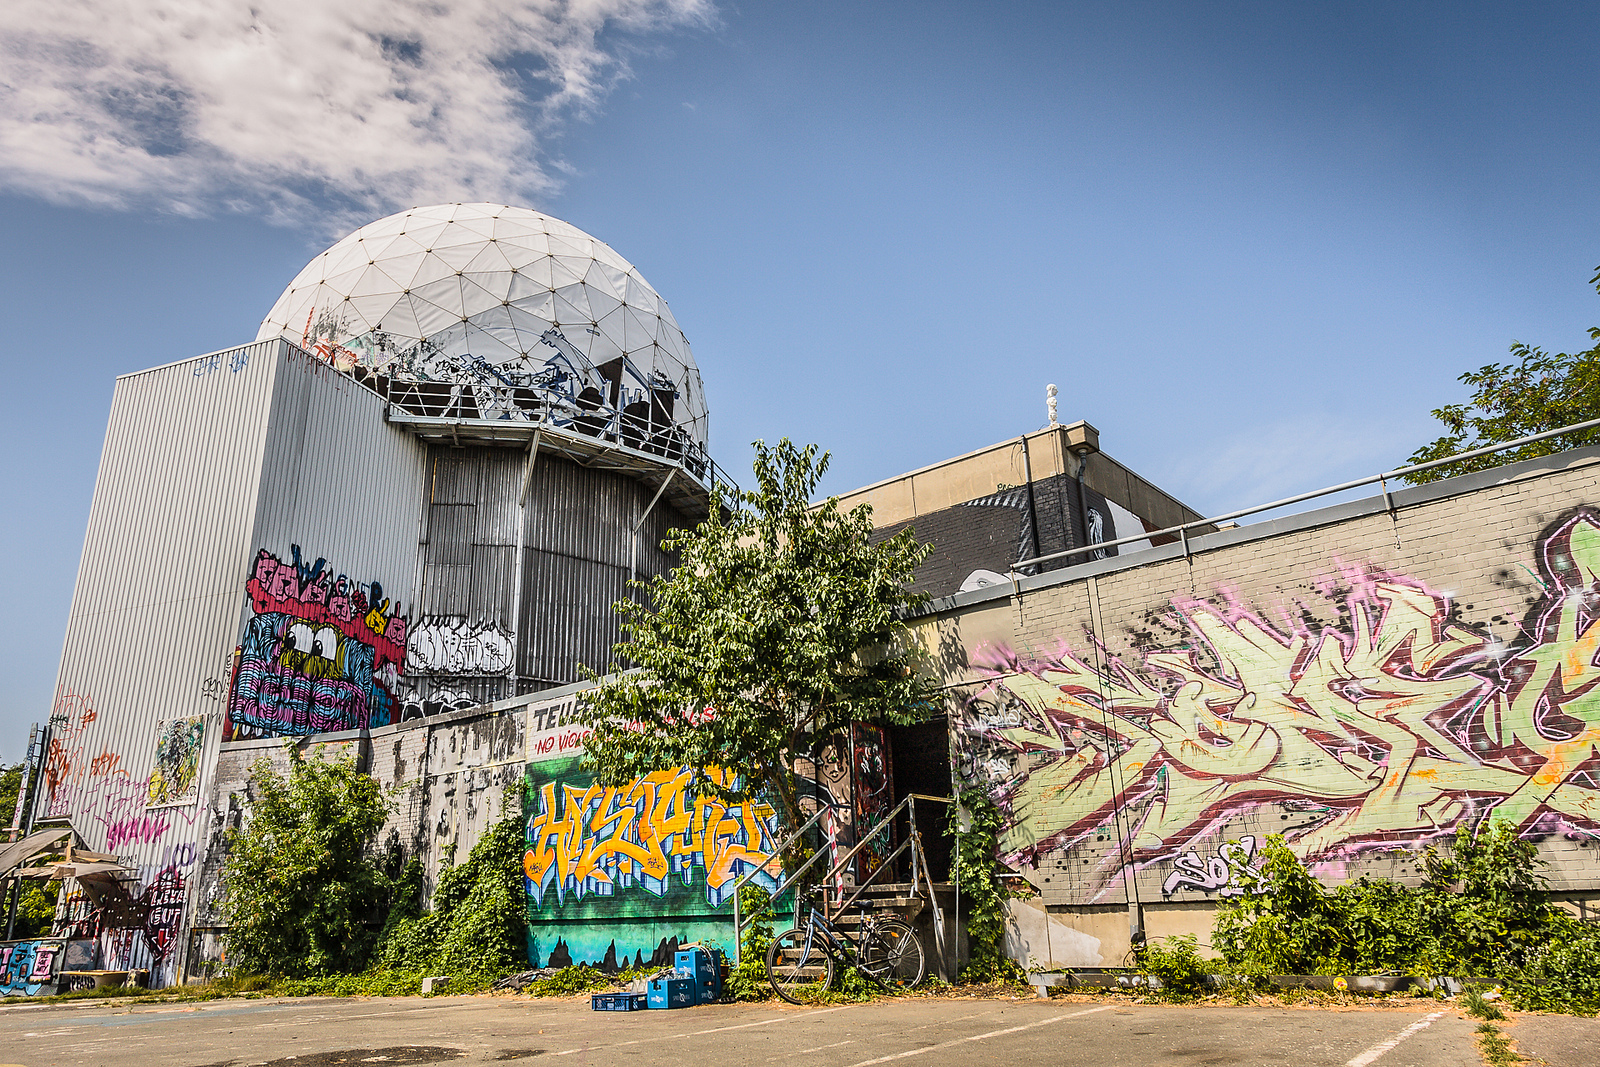 8 Abandoned Radar Stations That Were Once State-Of-The-Art